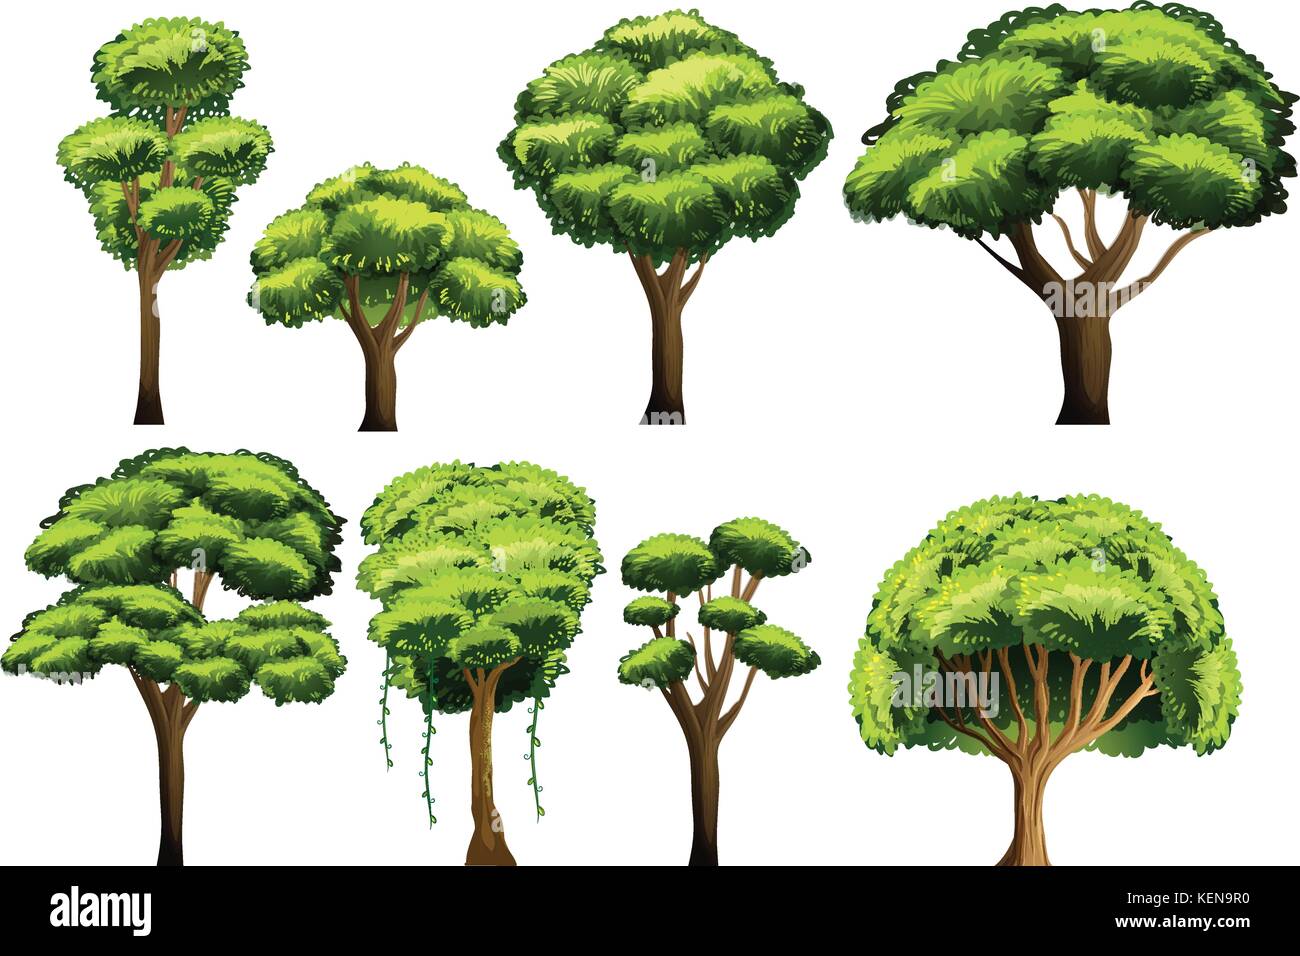 Drawing Collectiondifferent Types Of Trees Ink Sketch Vector Illustration  Stock Illustration - Download Image Now - iStock